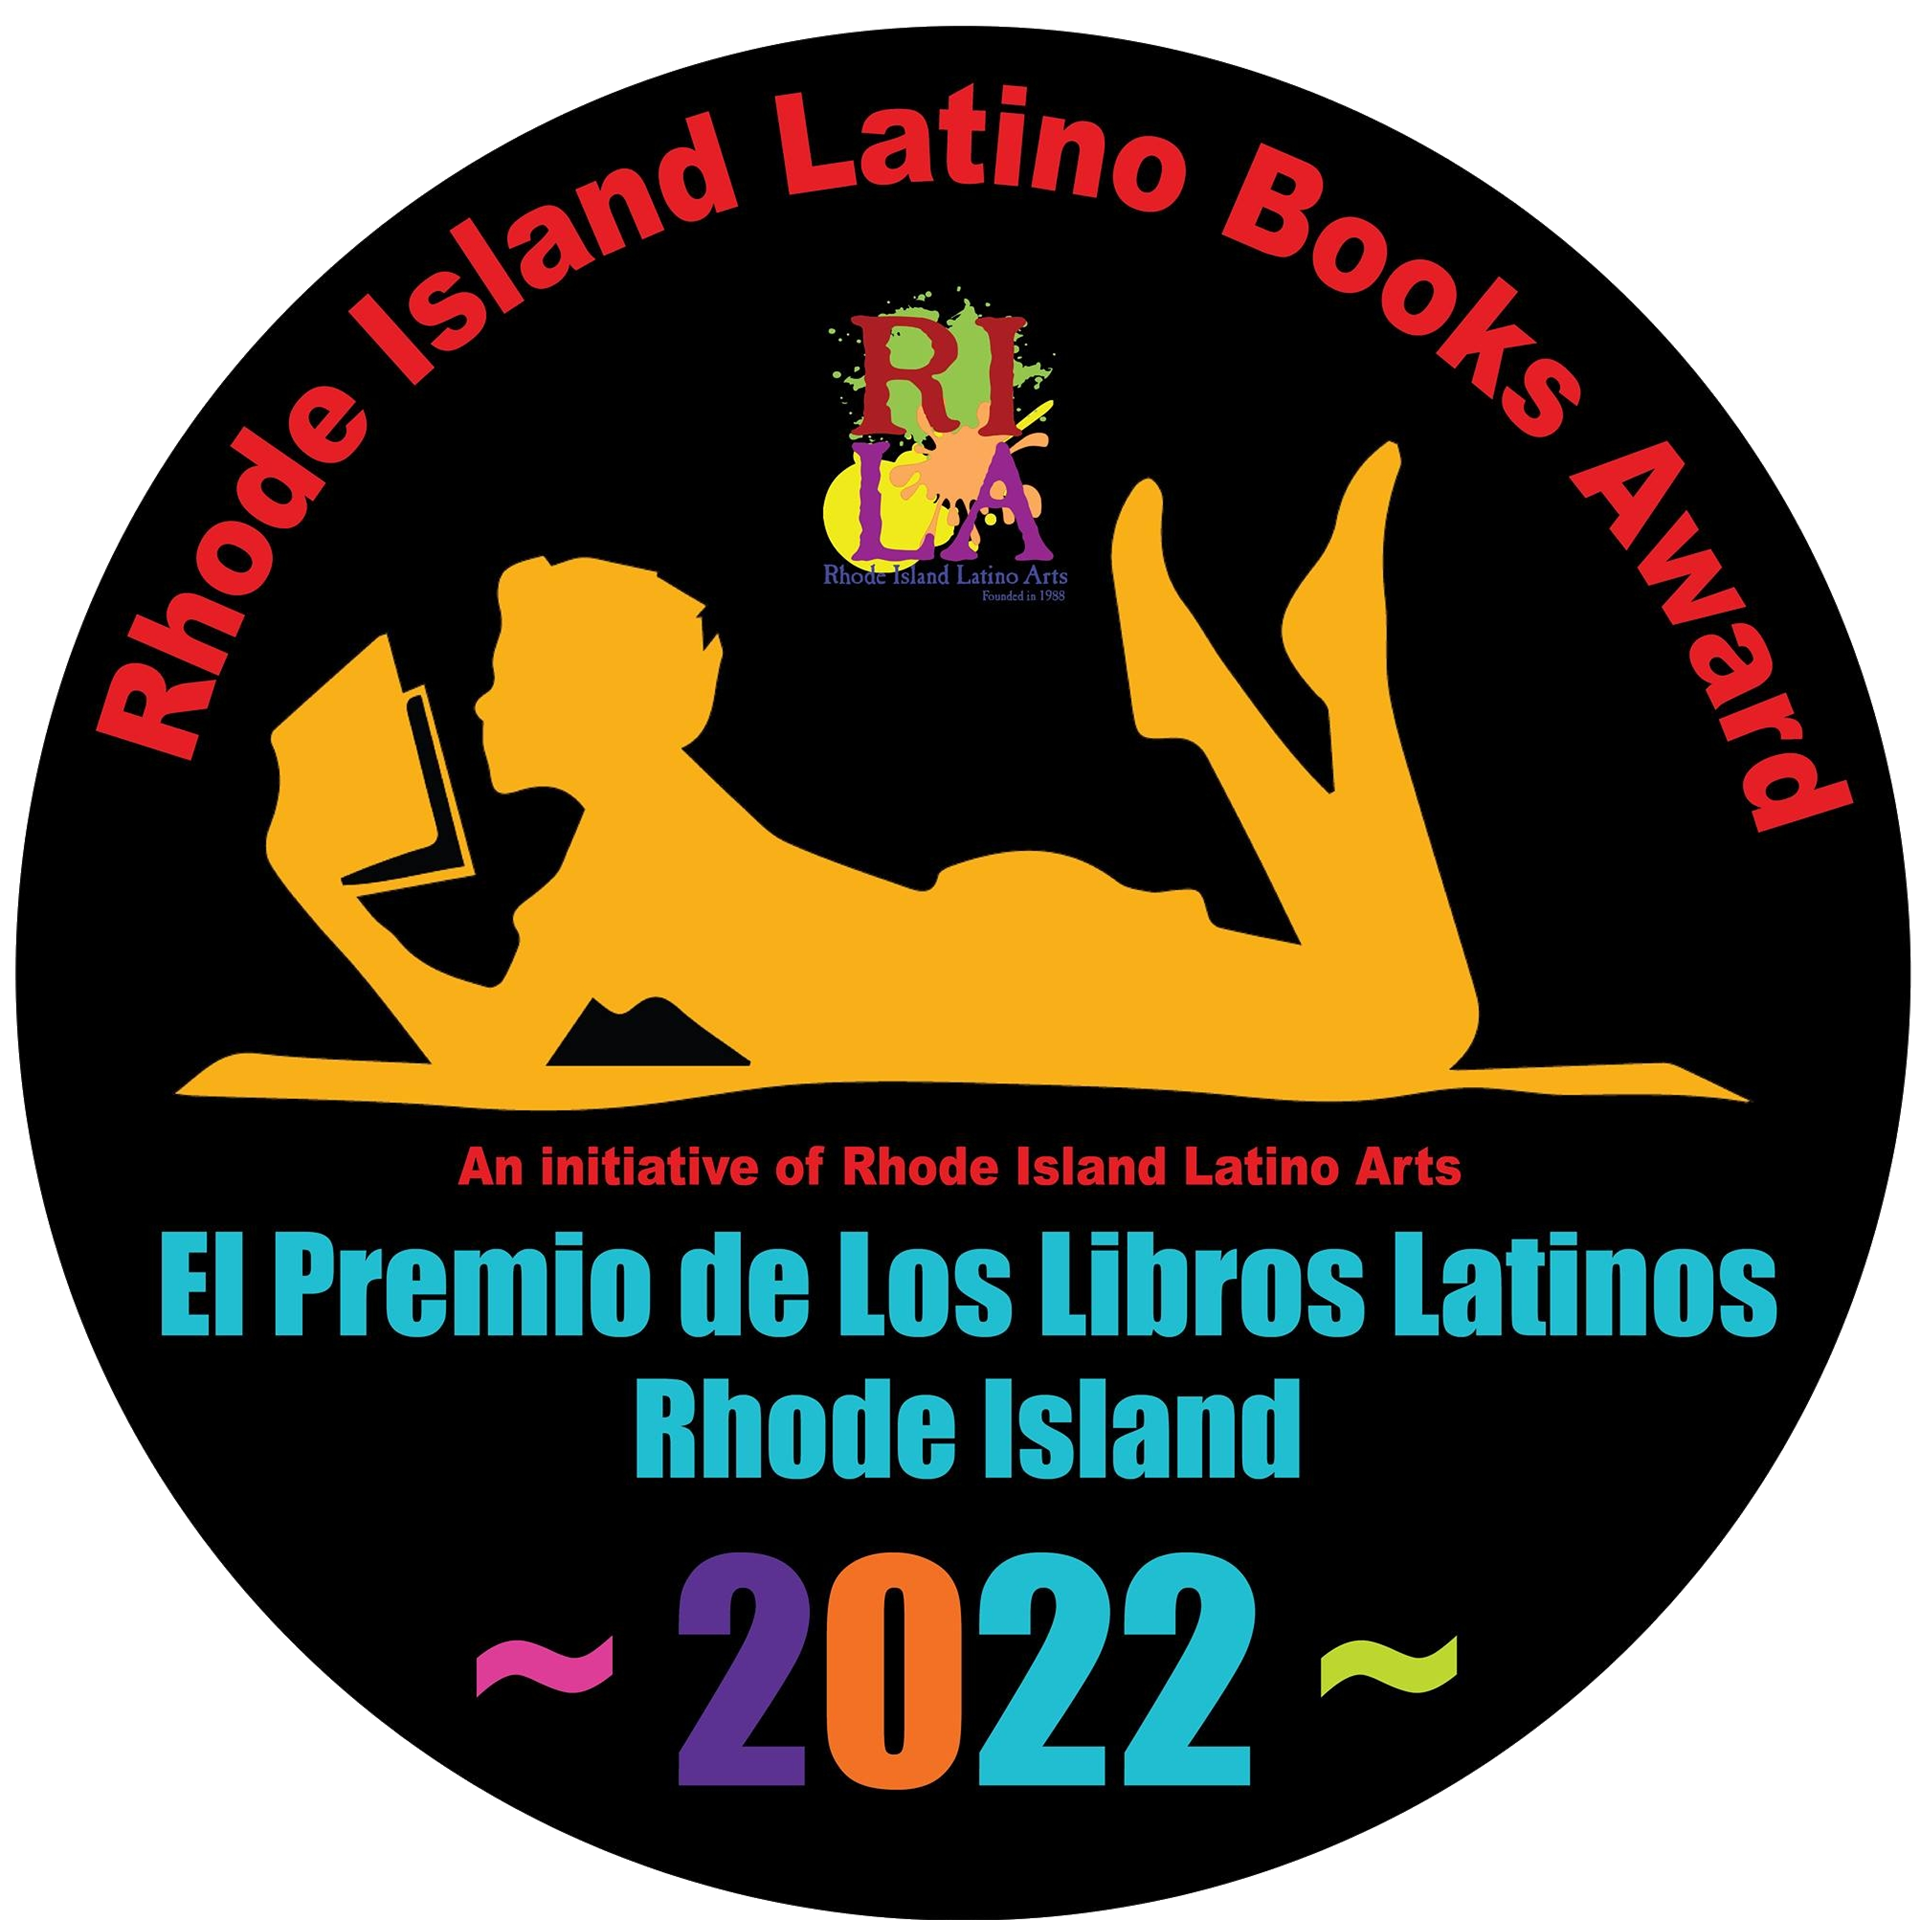 Rhode Island Latino Books Award logo, featuring an illustration of someone lying on the ground reading a book.